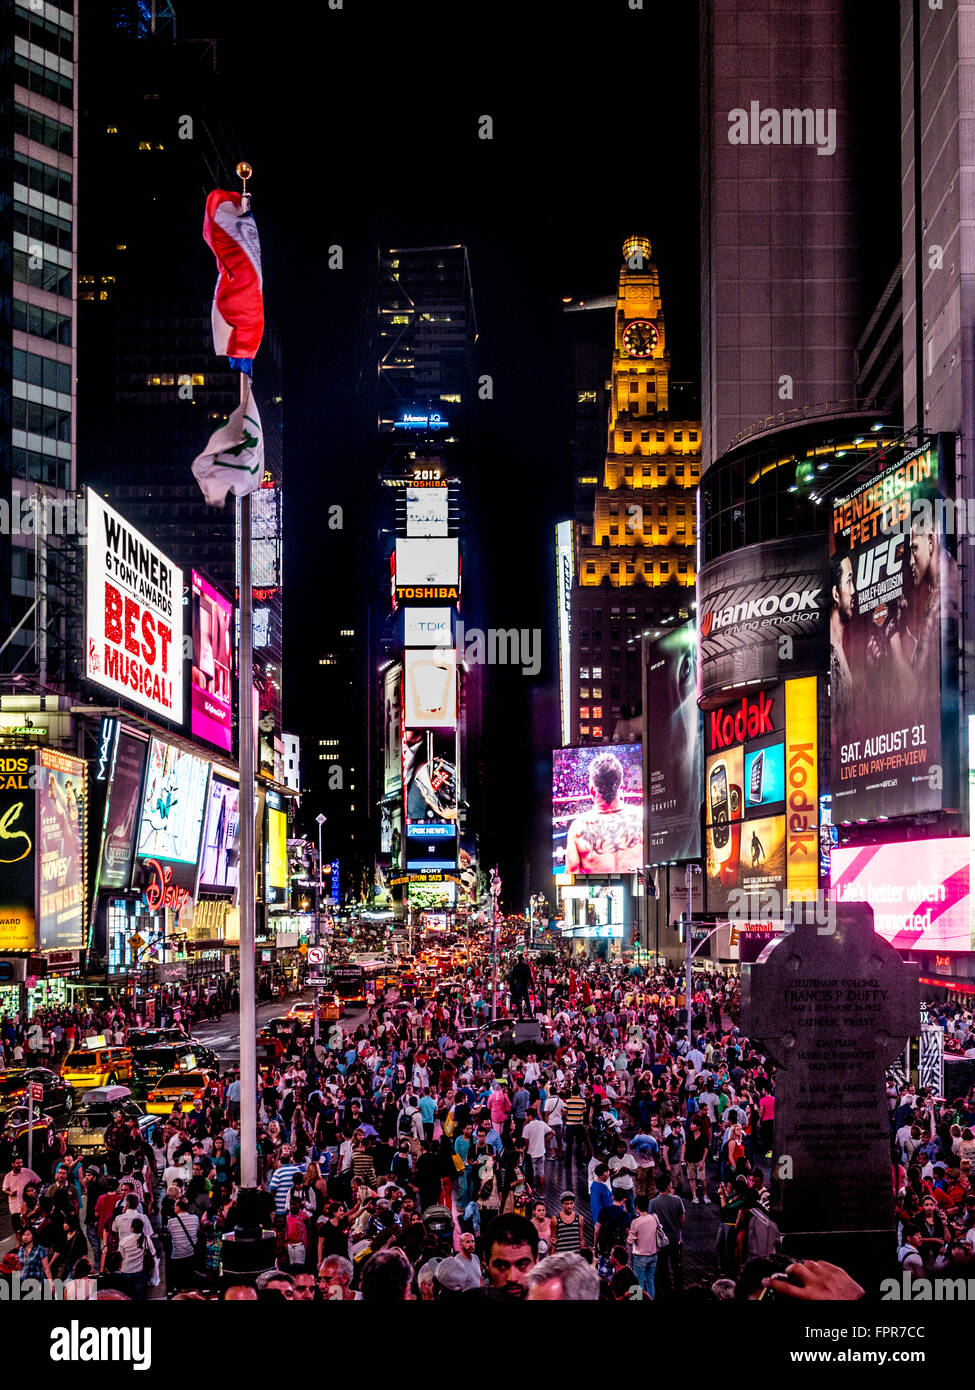 Crowd of people in Times Square at night, New York City, USA. Stock Photo